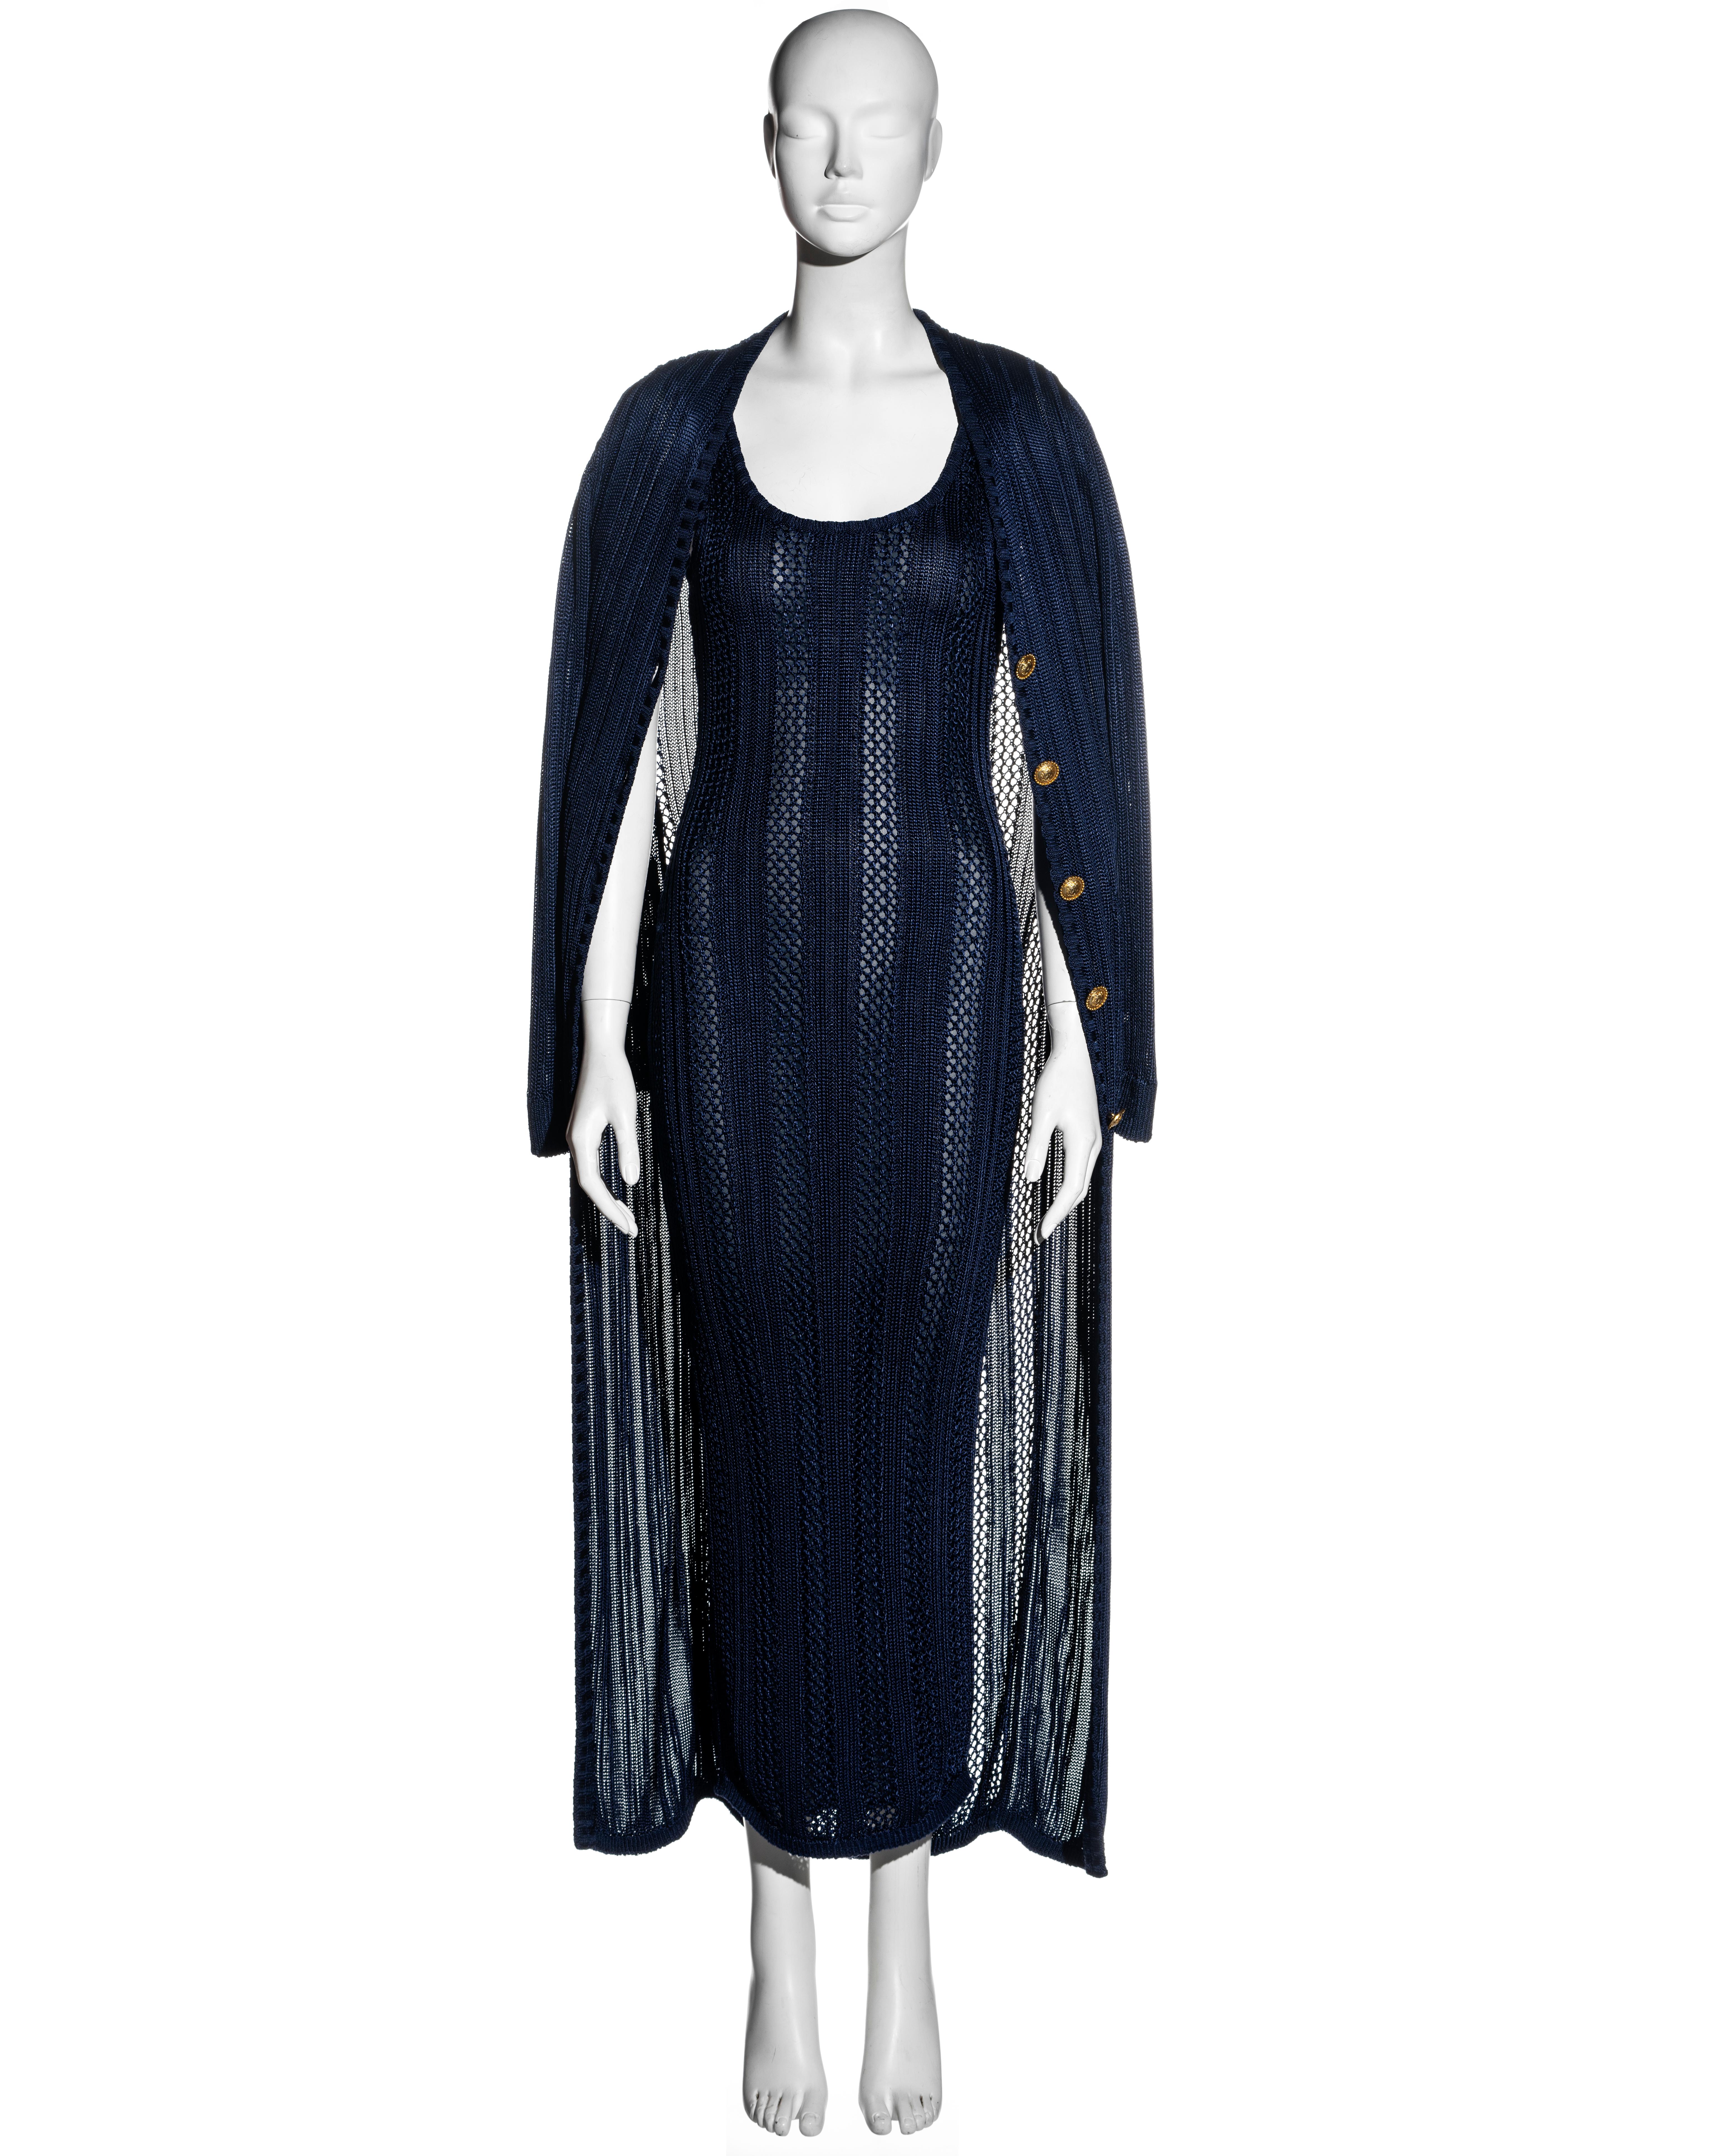 ▪ Gianni Versace navy blue open-knit dress and cardigan 2 piece set
▪ Sleeveless bodycon maxi dress with lining
▪ Long-sleeve full-length cardigan 
▪ Gold Medusa buttons 
▪ Can be worn together or separately 
▪ IT 40 - FR 36 - UK 8
▪ 100% Acetate 
▪